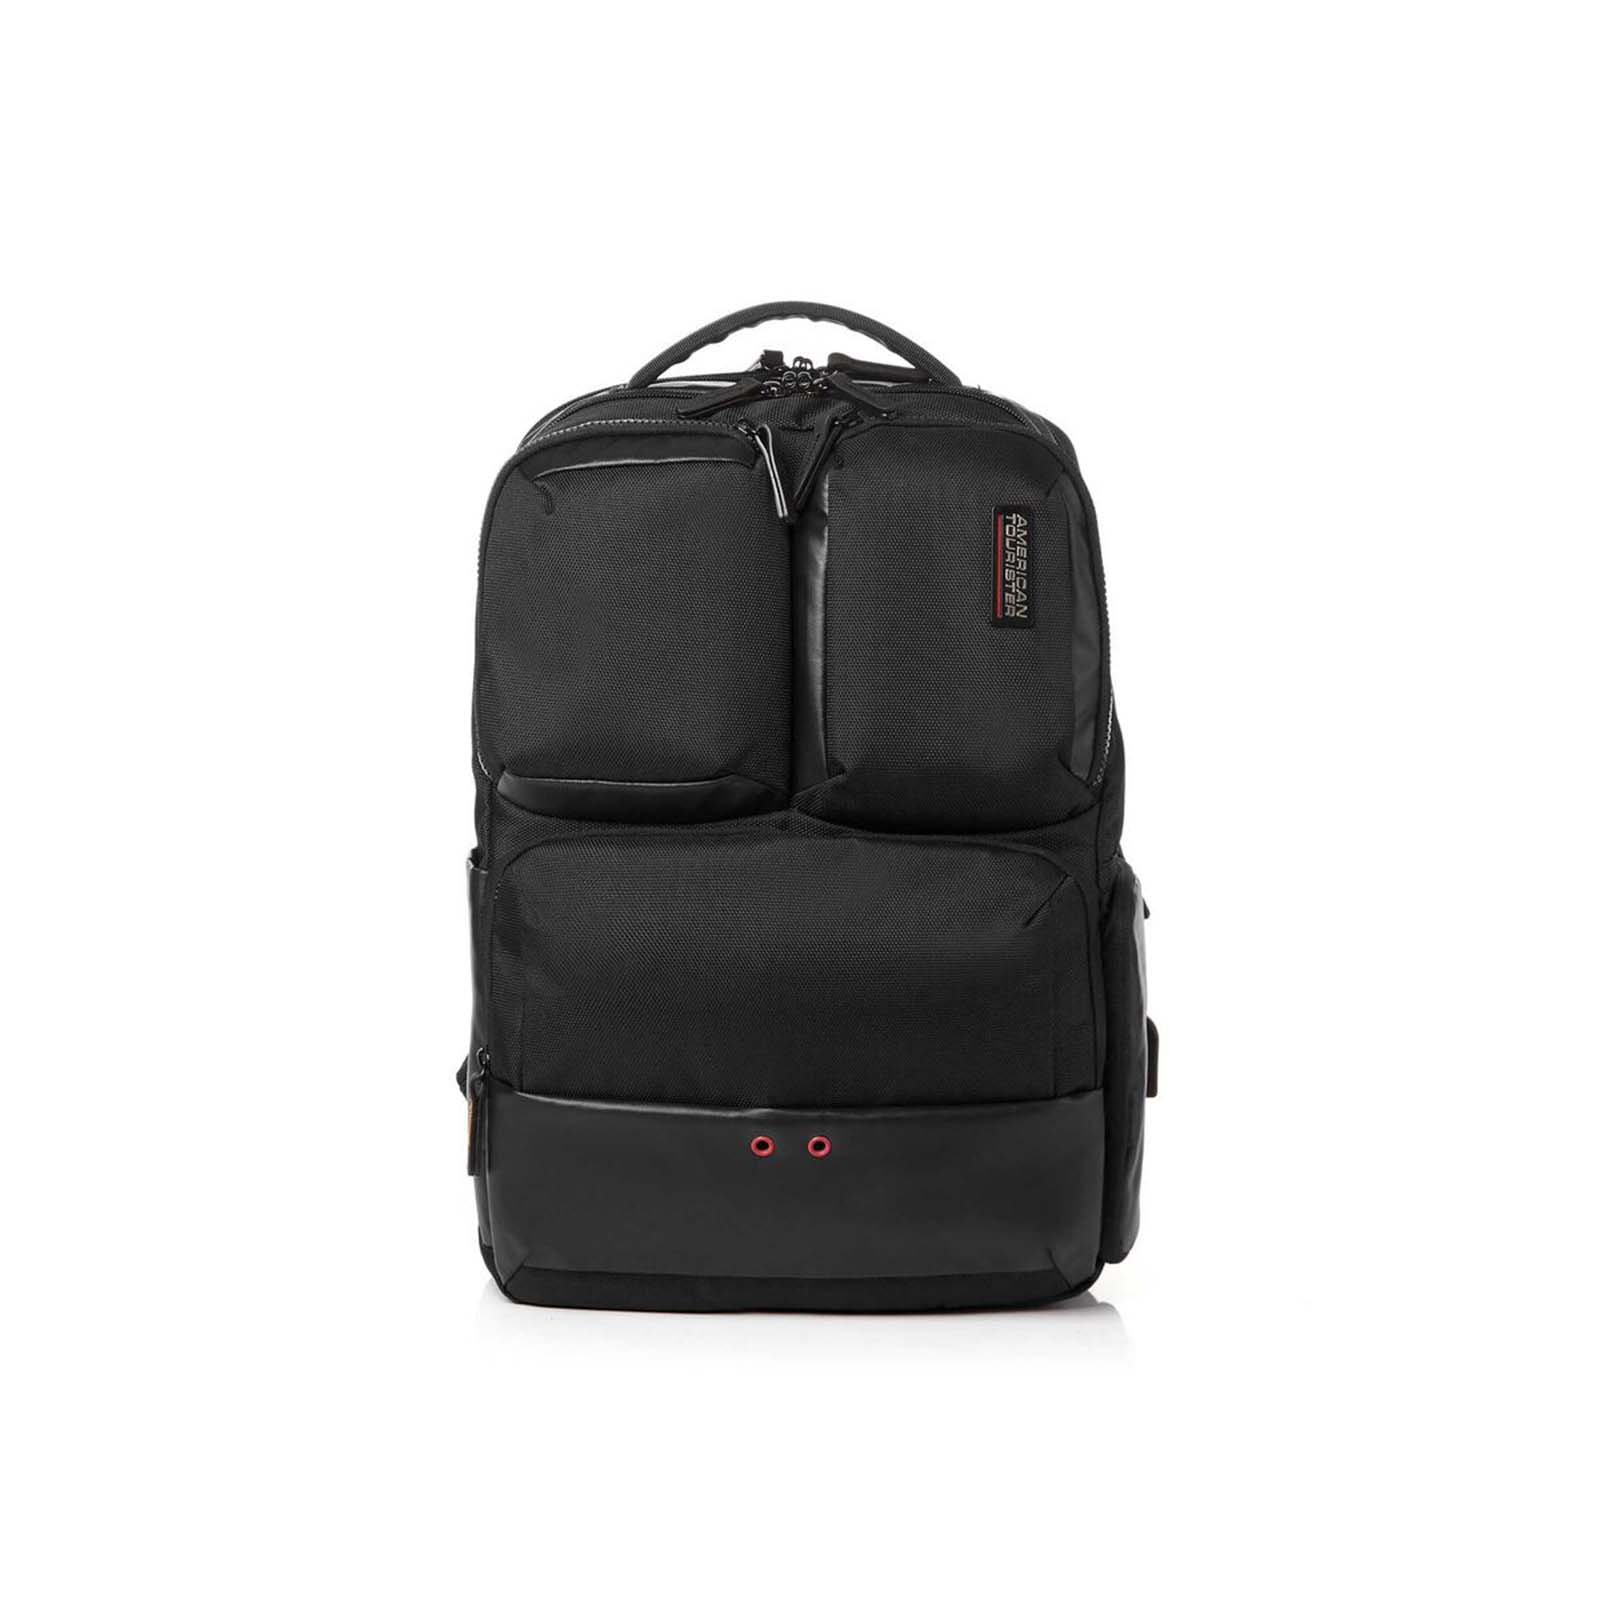 American-Tourister-Zork-15-Inch-Laptop-Backpack-Black-Front